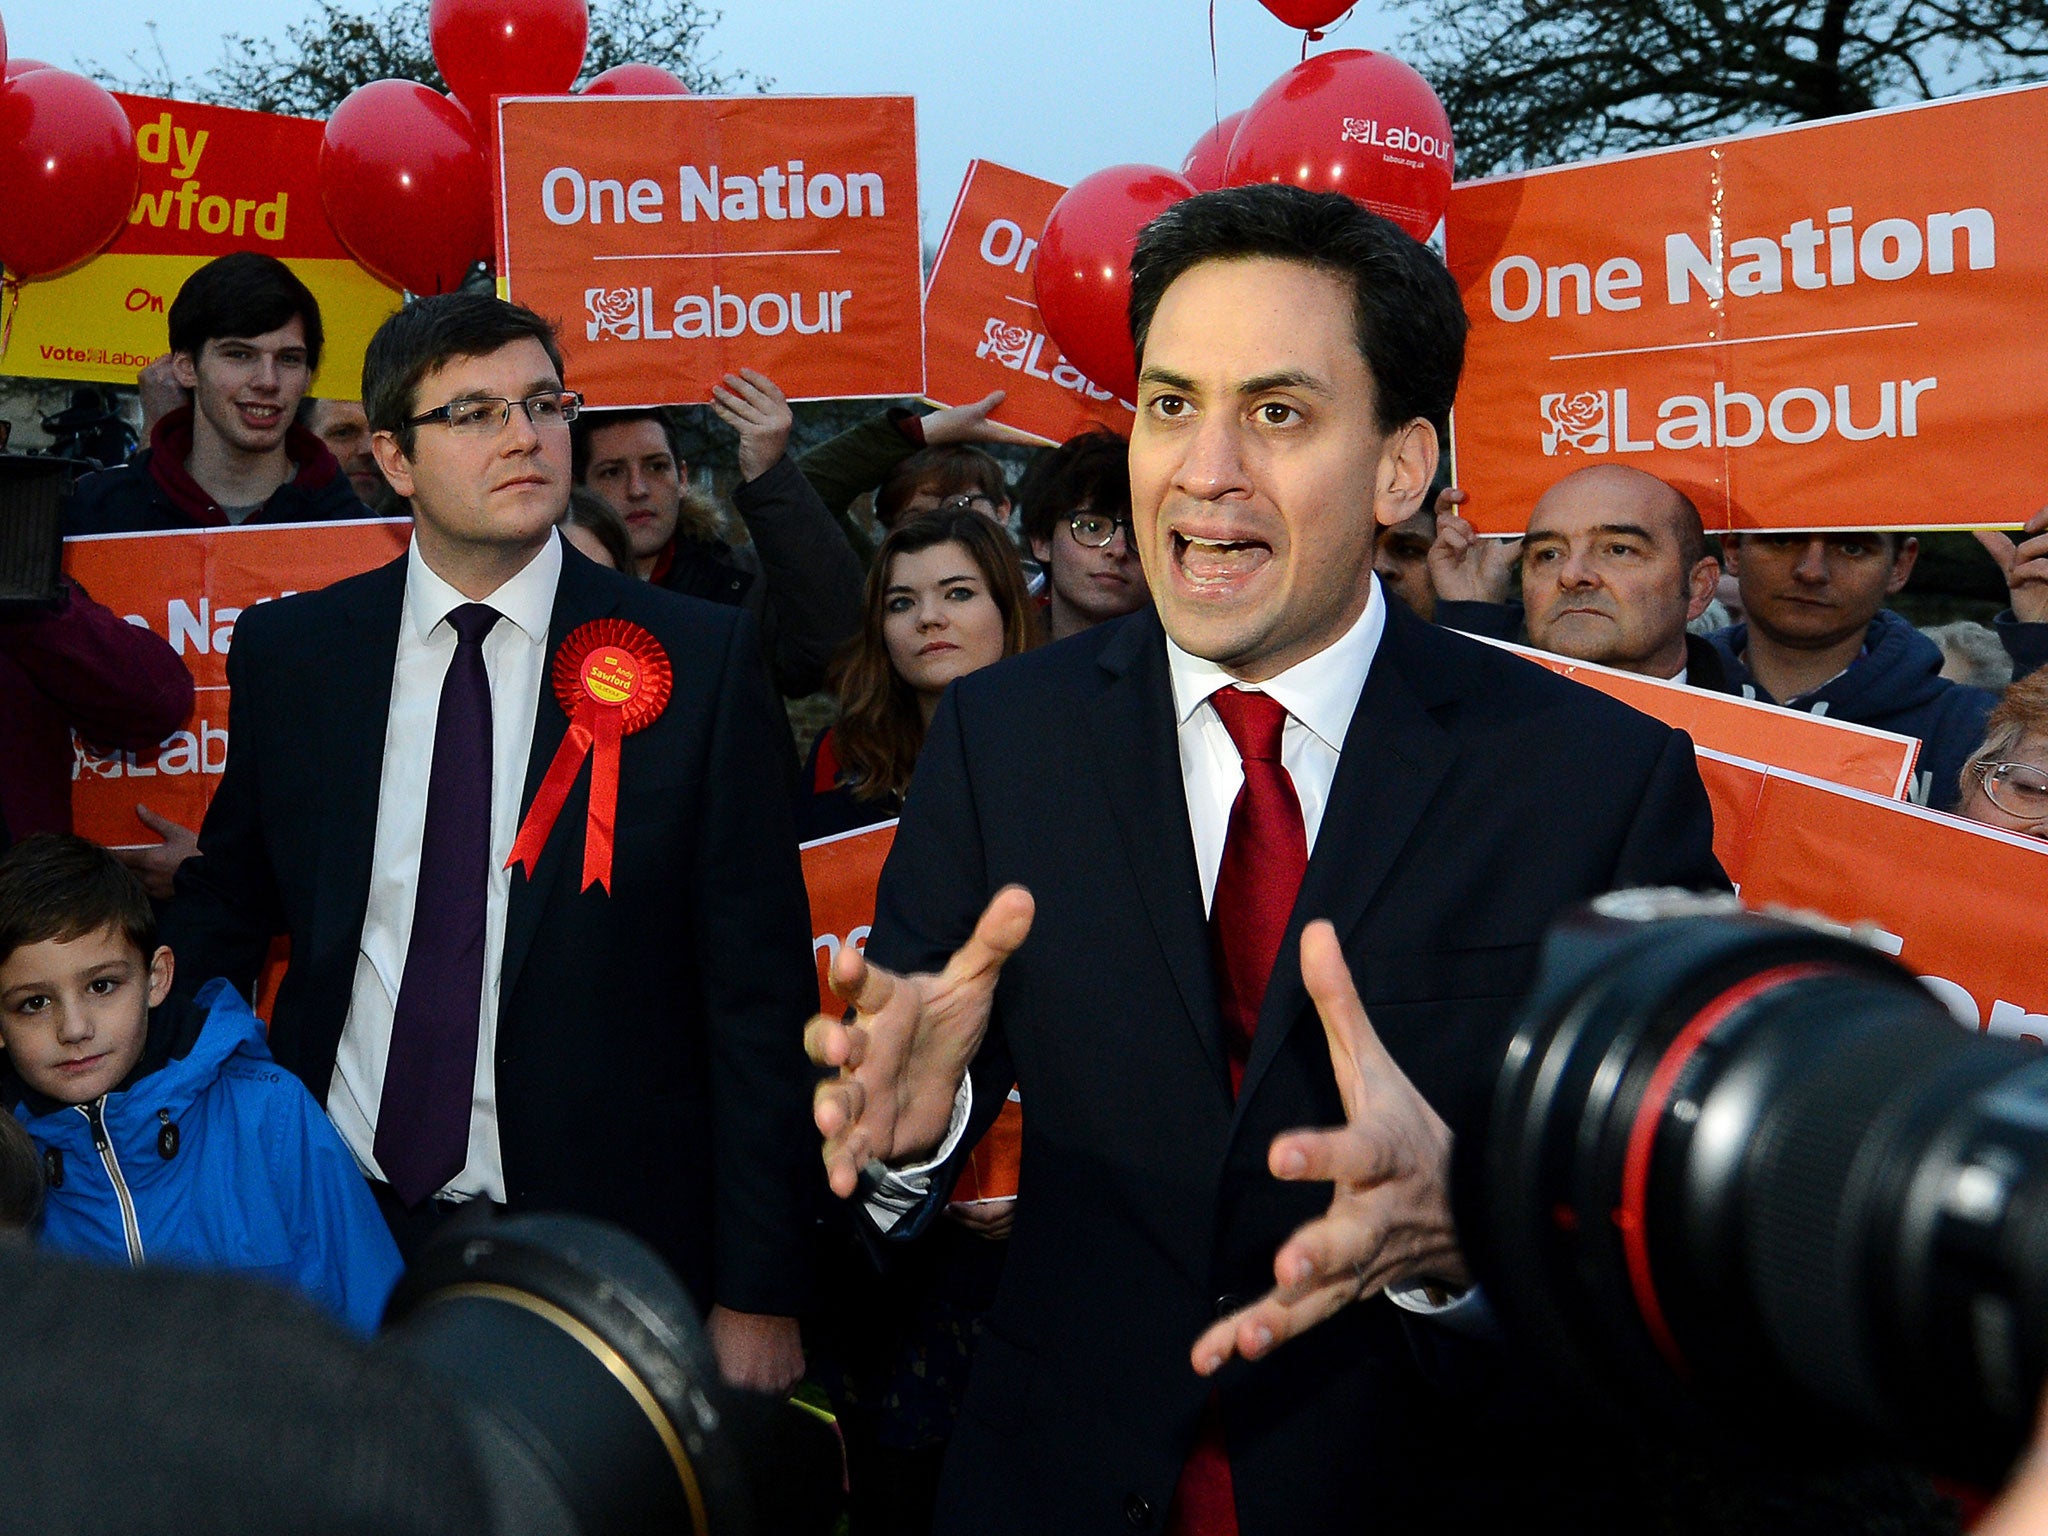 Candidate for Britain's opposition Labour party Andy Sawford (L) looks on as party leader Ed Miliband speaks to reporters after Sawford won the Corby Byelection in Corby, England on November 16, 2012.